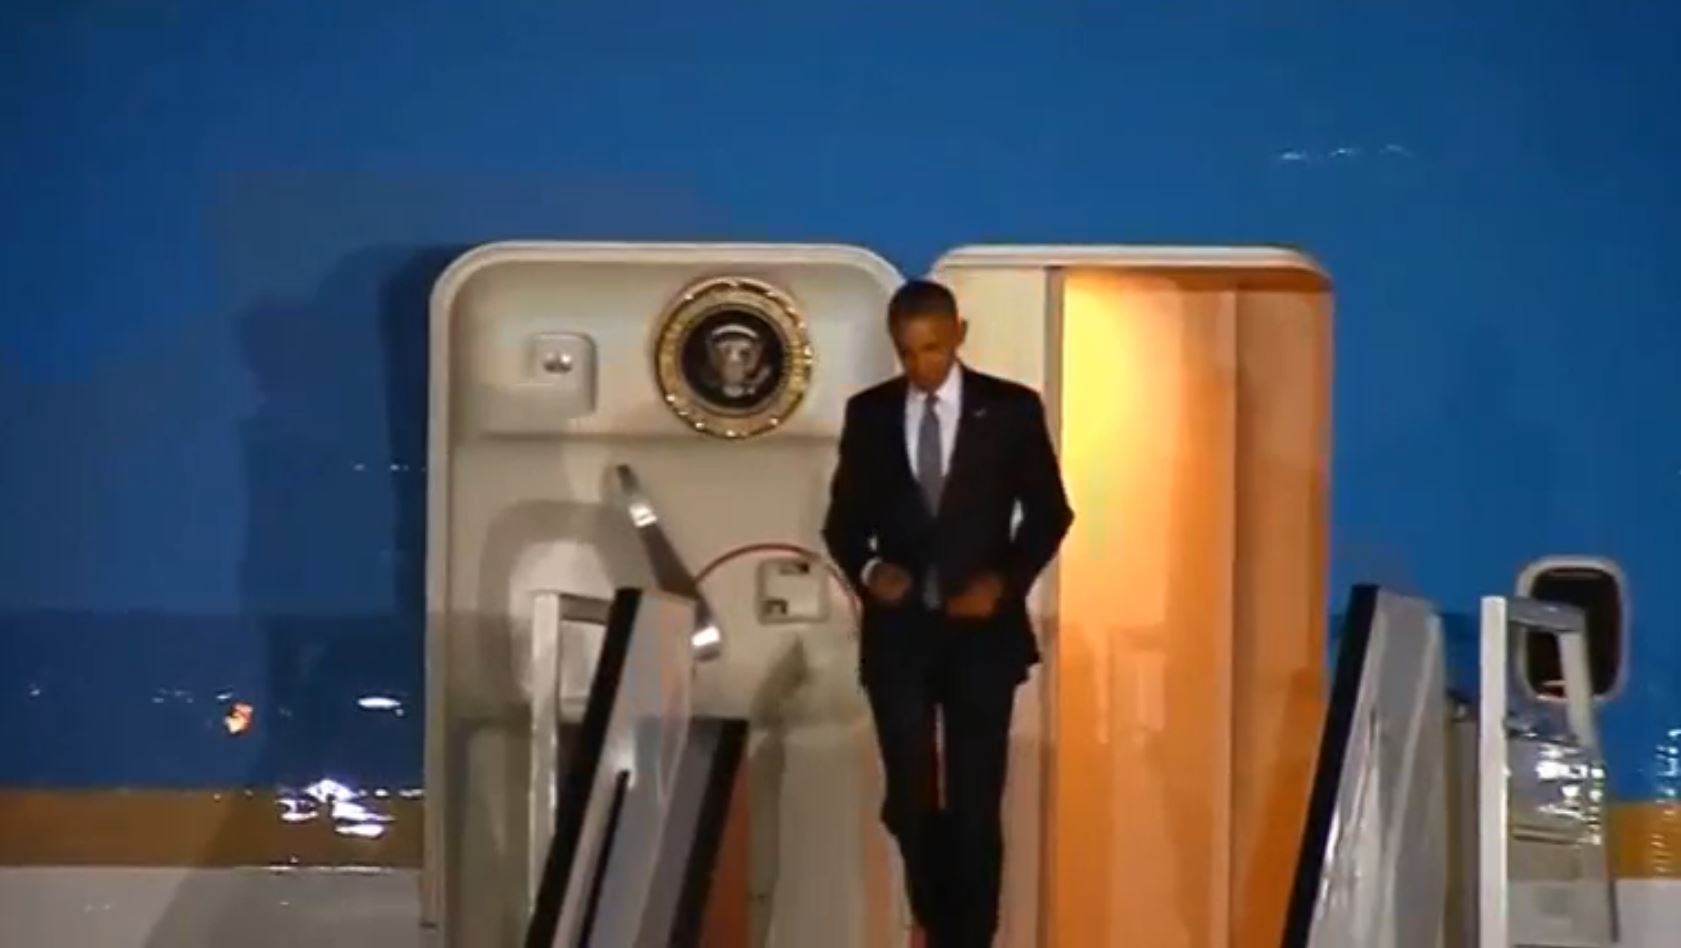 United States President Barack Obama arrives in Lima, Peru for the APEC Leaders' Summit.  (Photo grabbed from Reuters video)